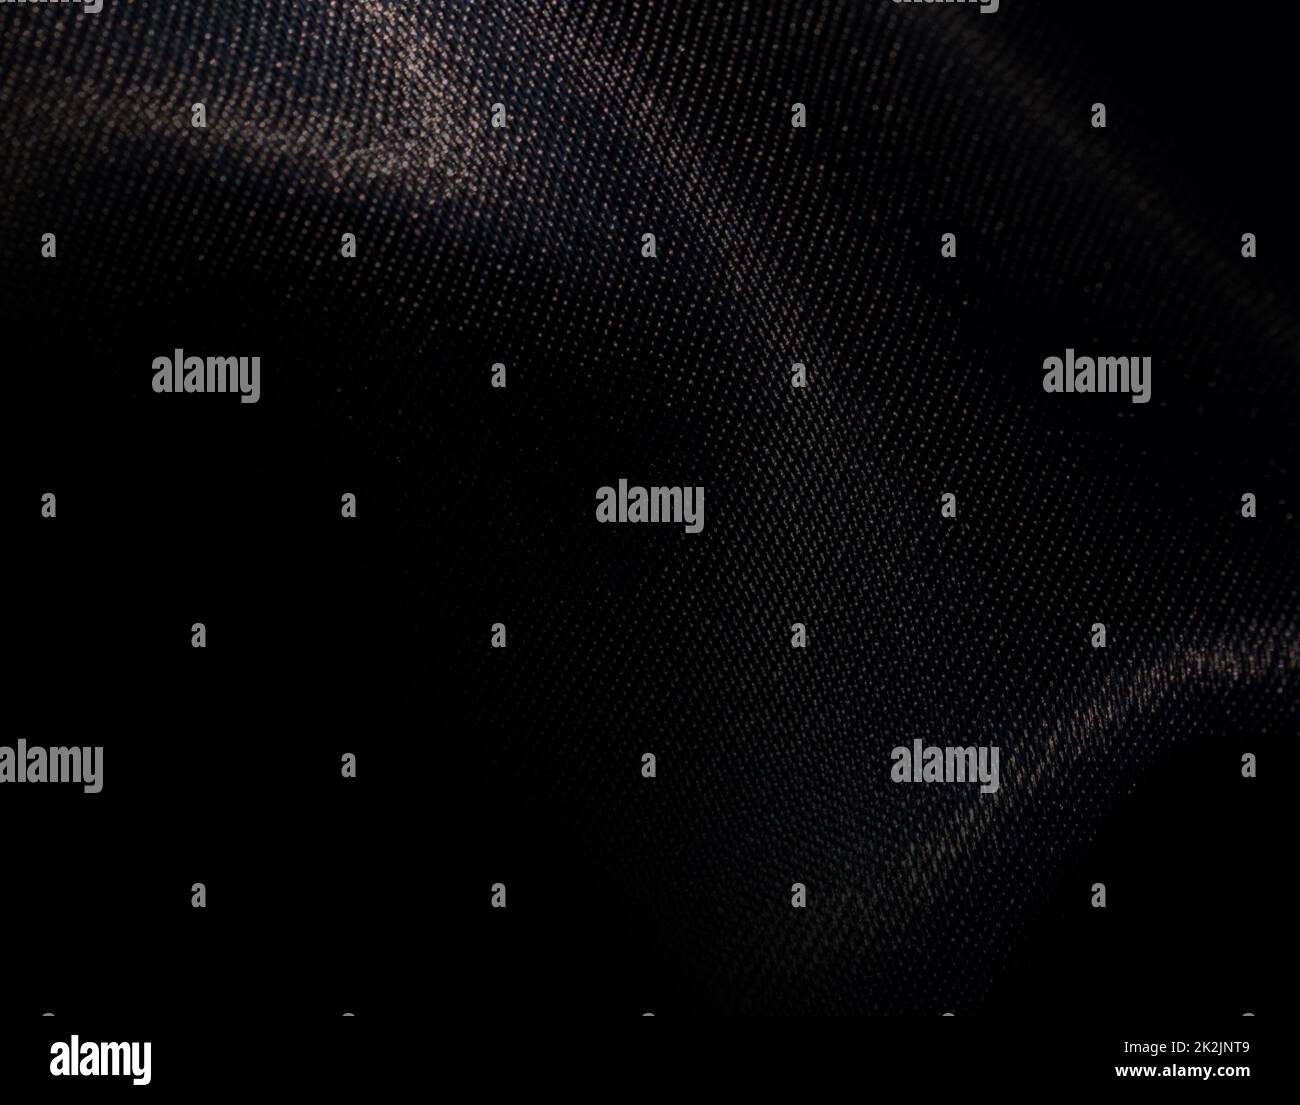 Black shiny polyester fabric background for graphic design, banner, poster  Stock Photo - Alamy